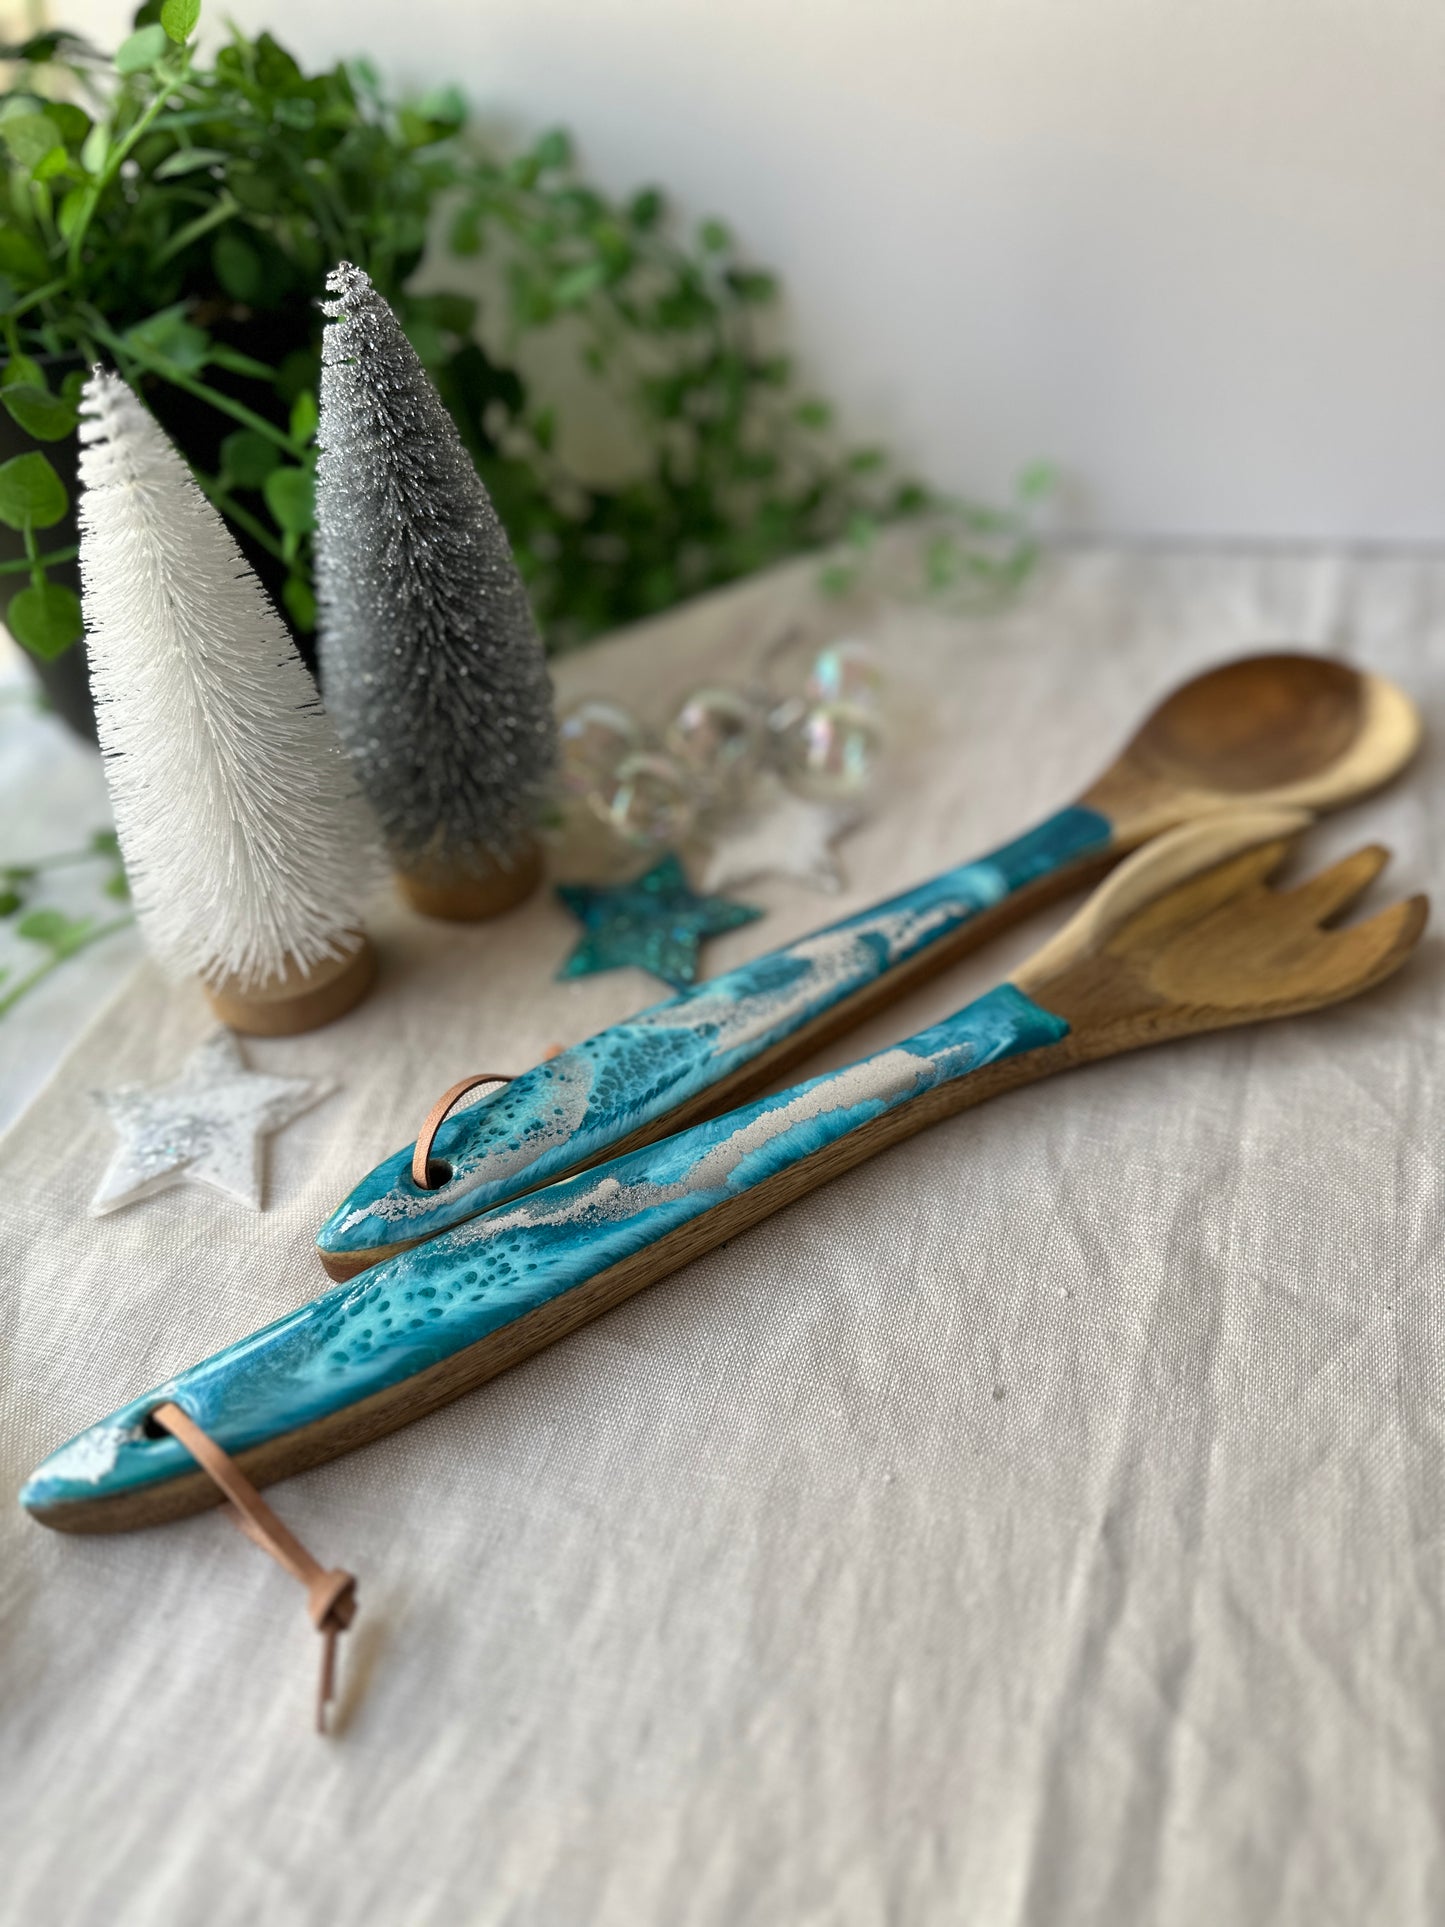 SALAD SERVERS - teal and silver